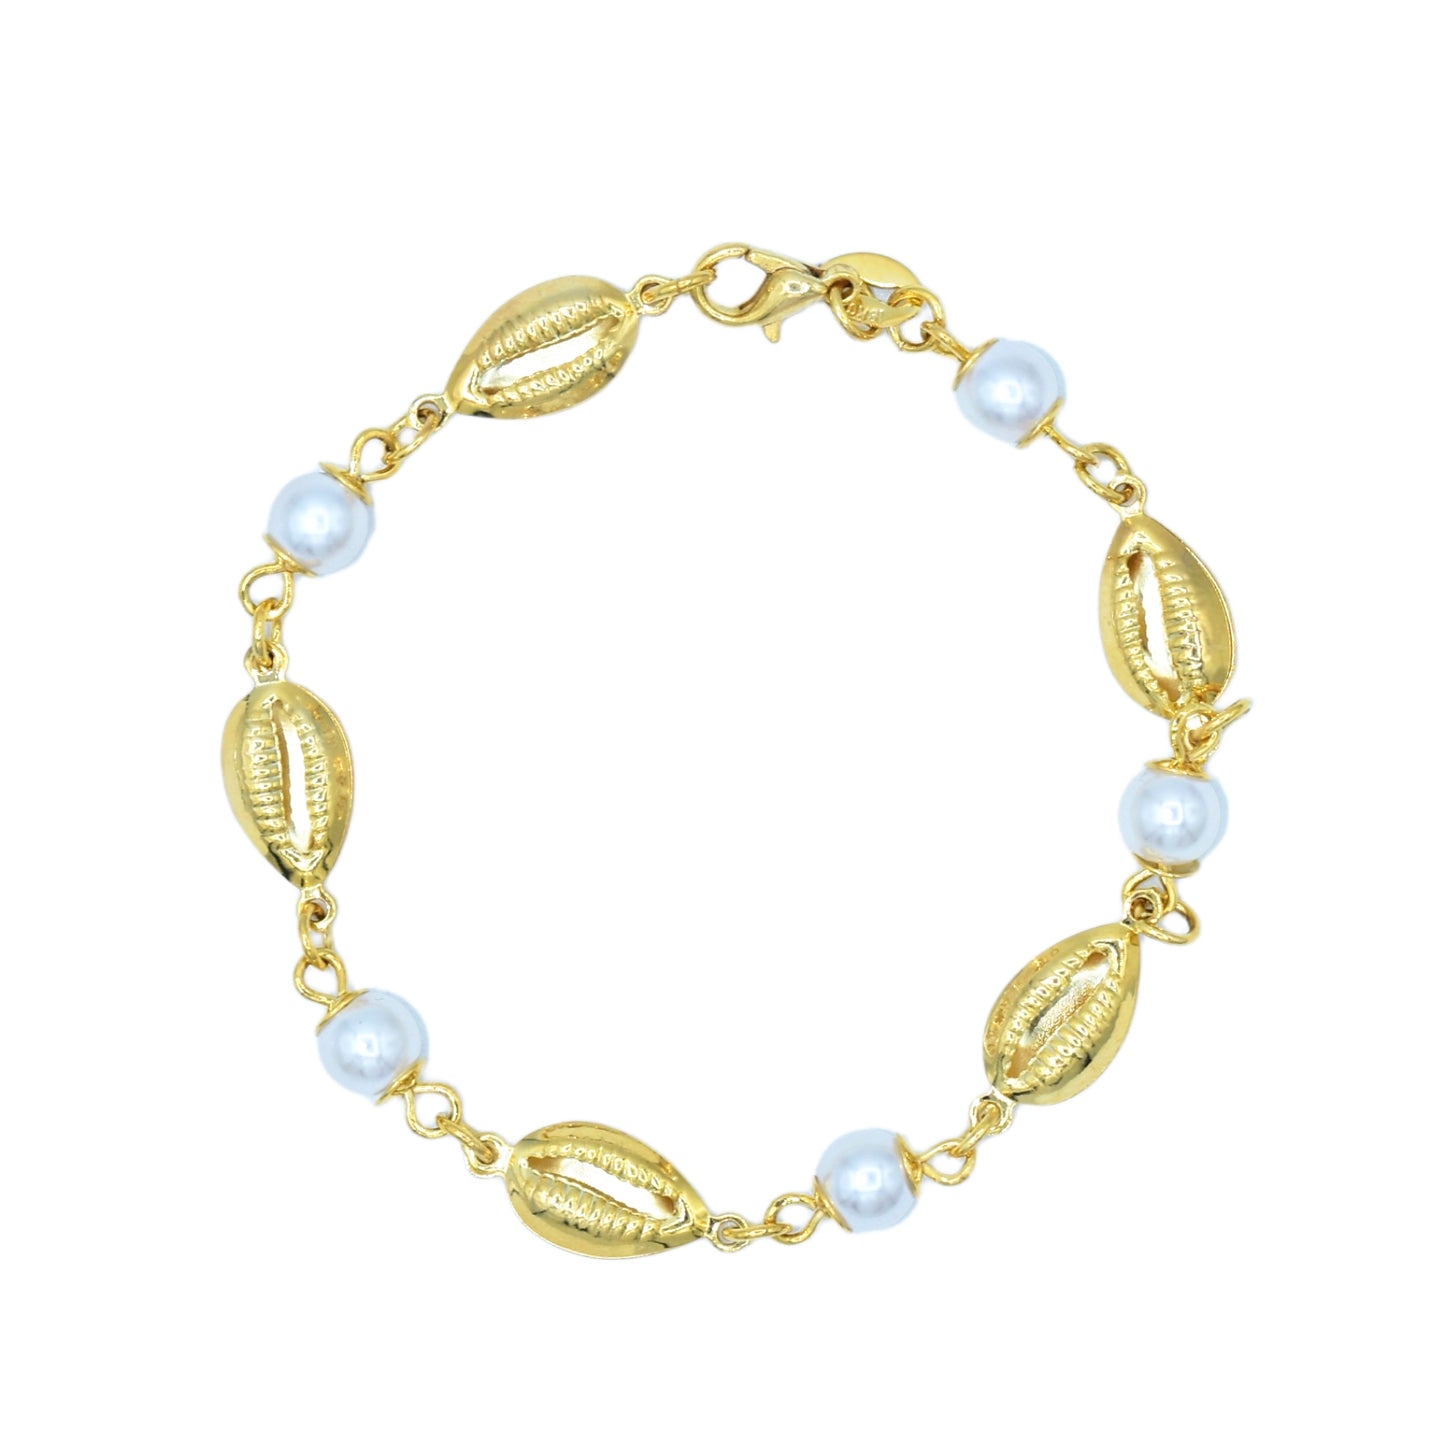 Pearls and Gold Shells Bracelet